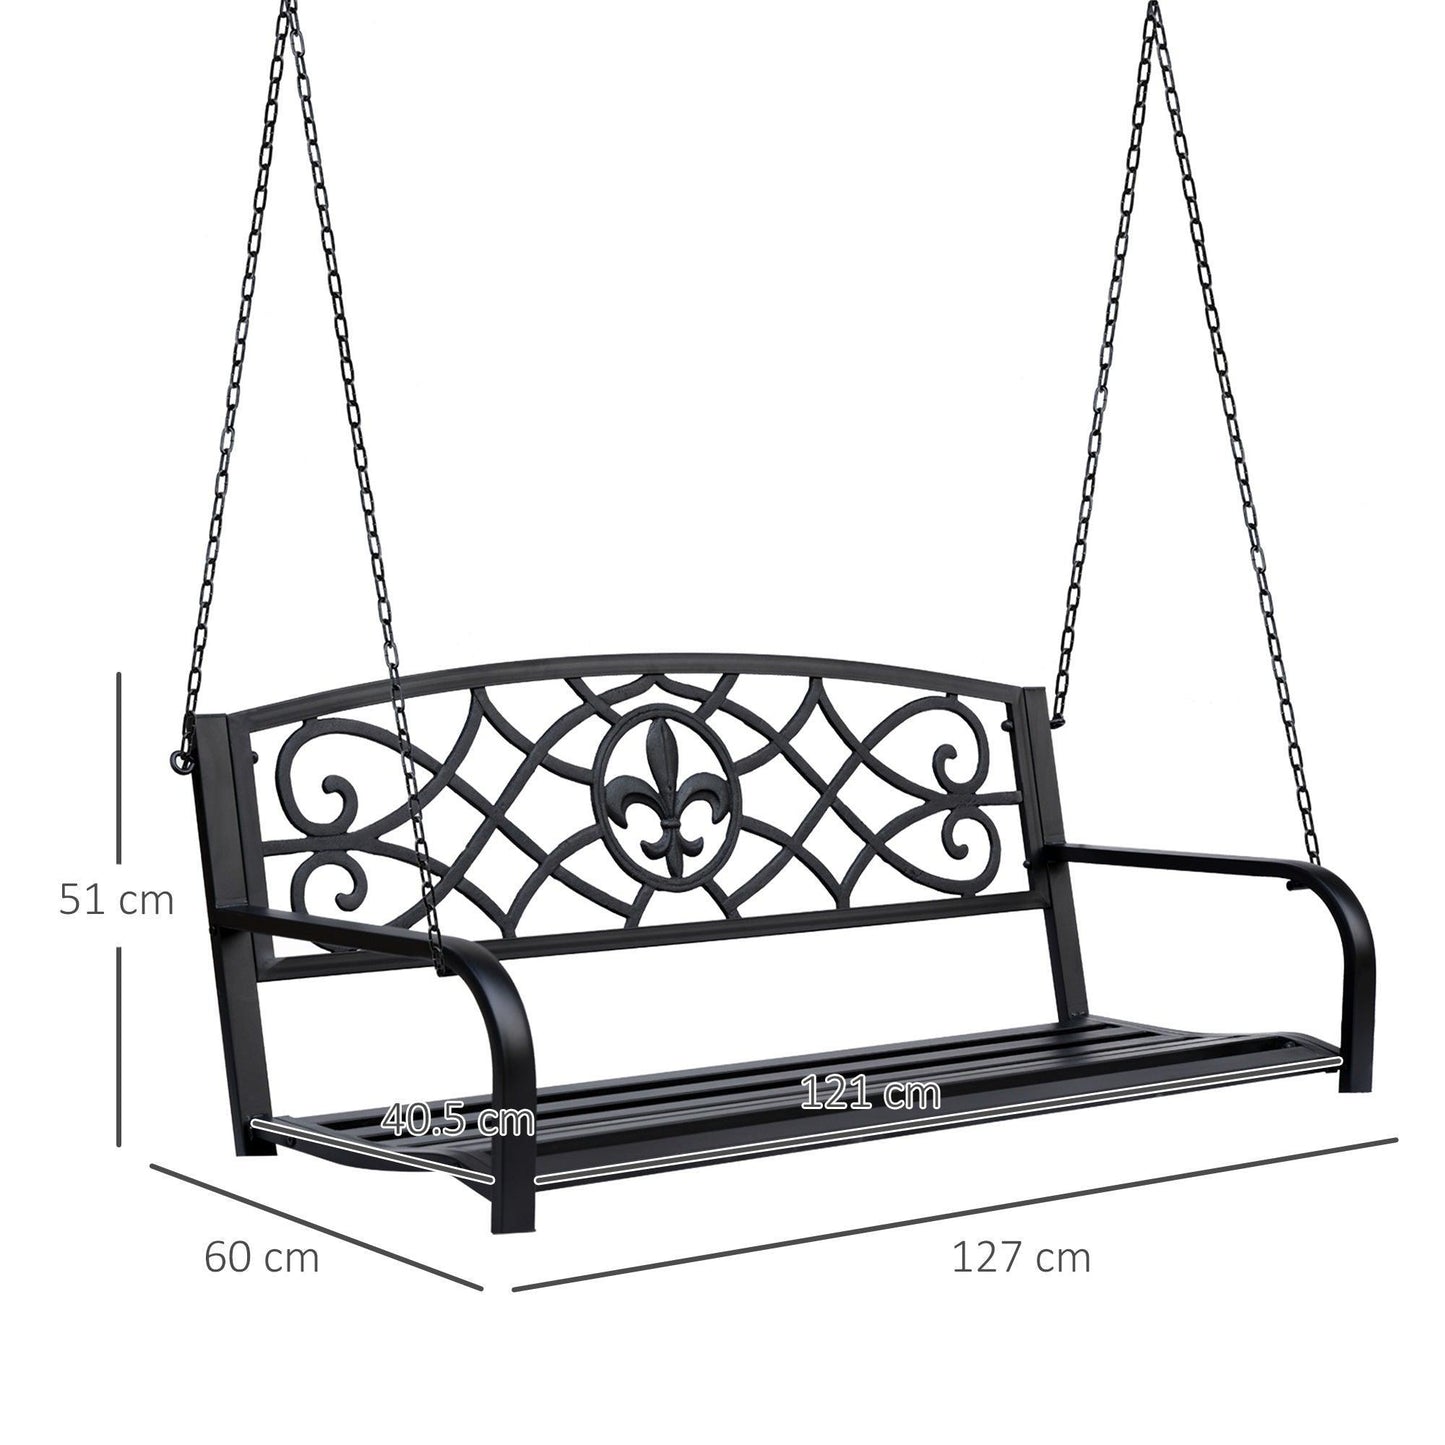 Outsunny Outdoor Swing Bench Seat for Yard, Deck, and Backyard - Black - ALL4U RETAILER LTD